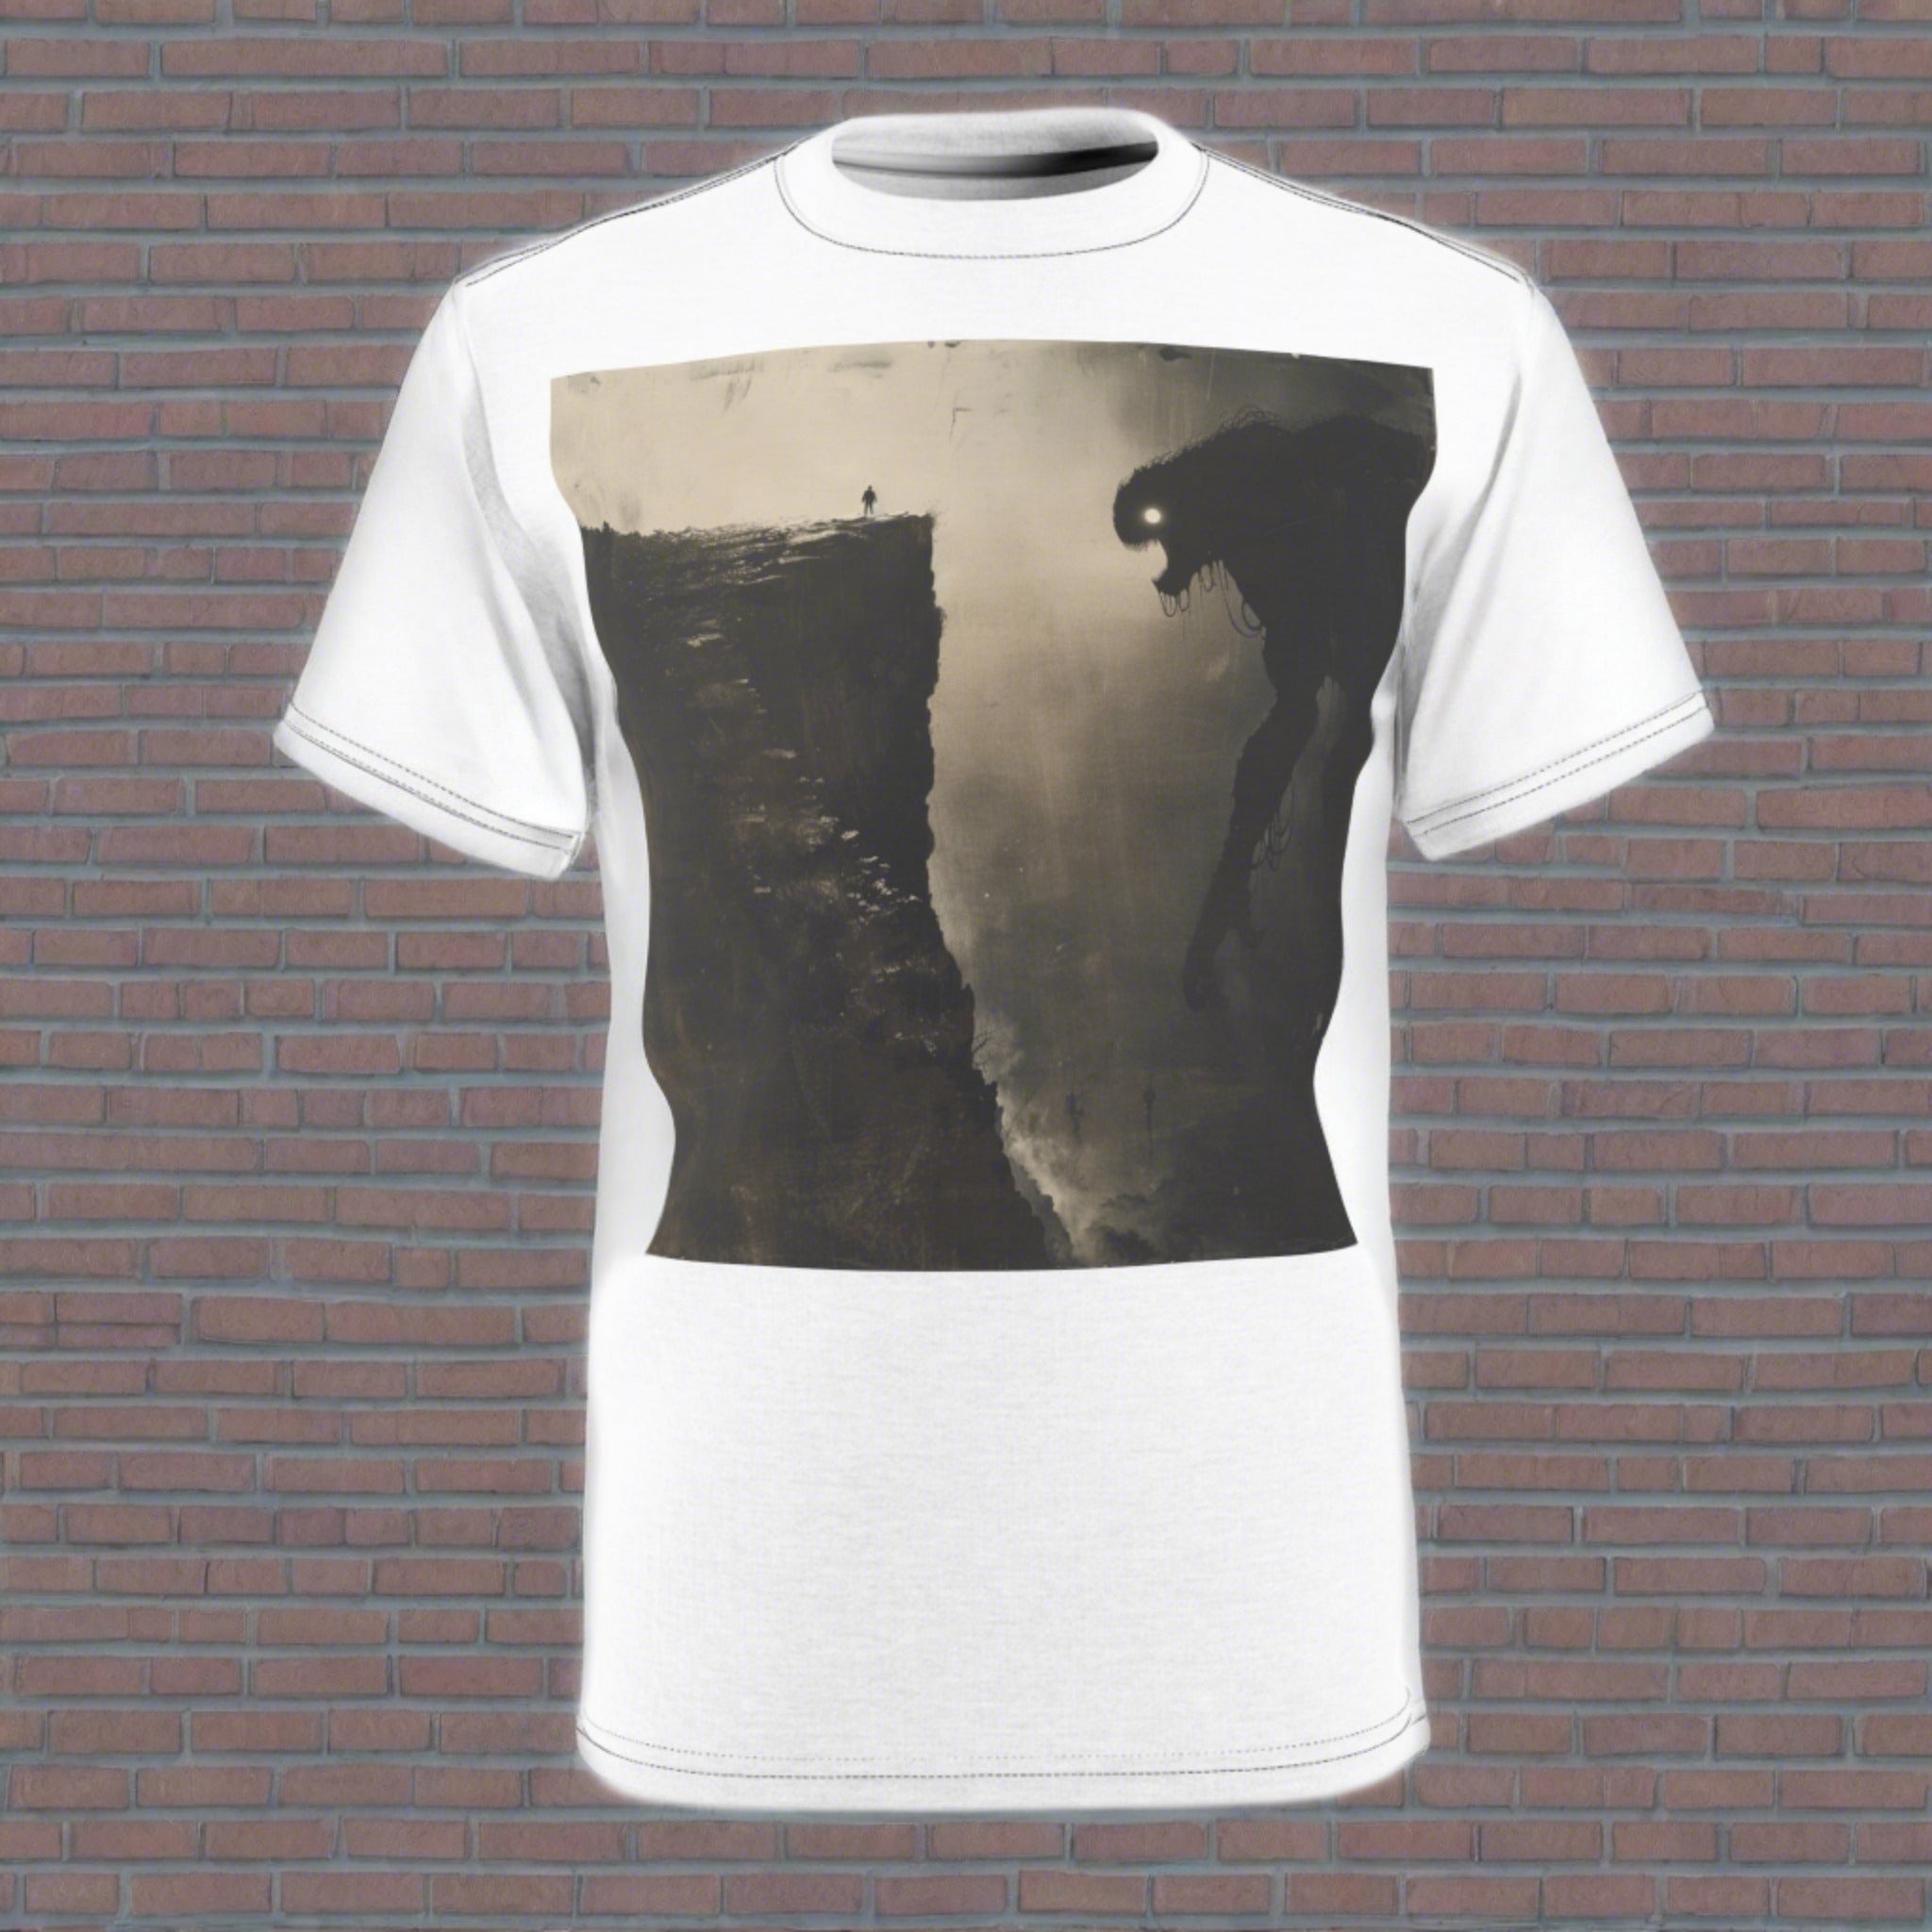 The image features a dynamic, full-coverage print on a unisex tee, showcasing an artistic rendition of a man standing resiliently on a cliff, facing the enormous shadow of a monster - a metaphor for his inner fears. The detailed artwork extends across the fabric, highlighting the tee’s cut and sew craftsmanship, while the vibrant colors and bold imagery make it a standout piece of motivational apparel.